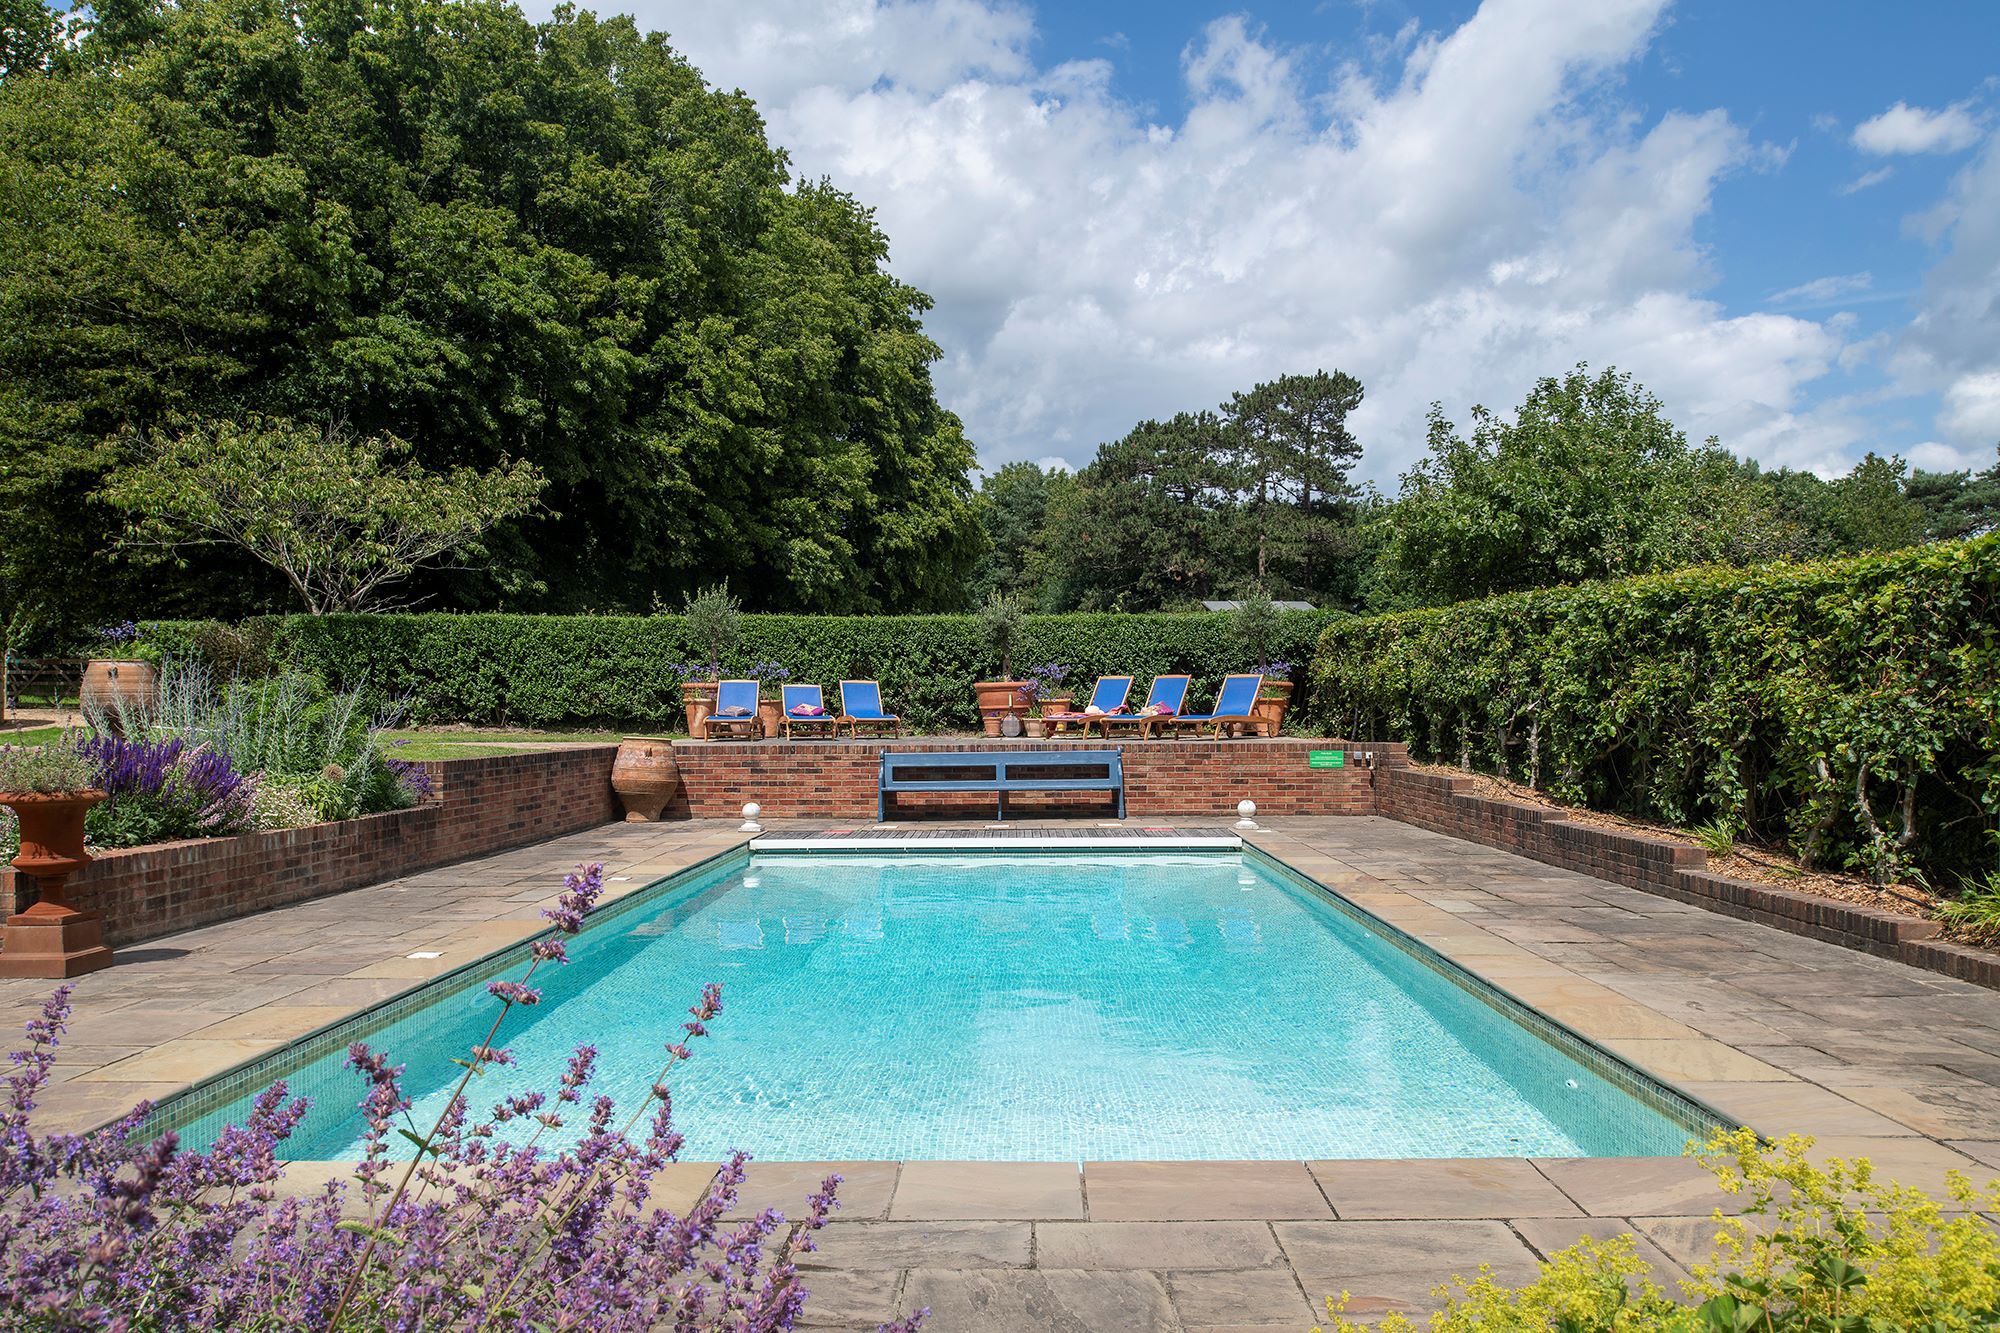 The Old Glebe - Stunning pool with plenty of sunloungers